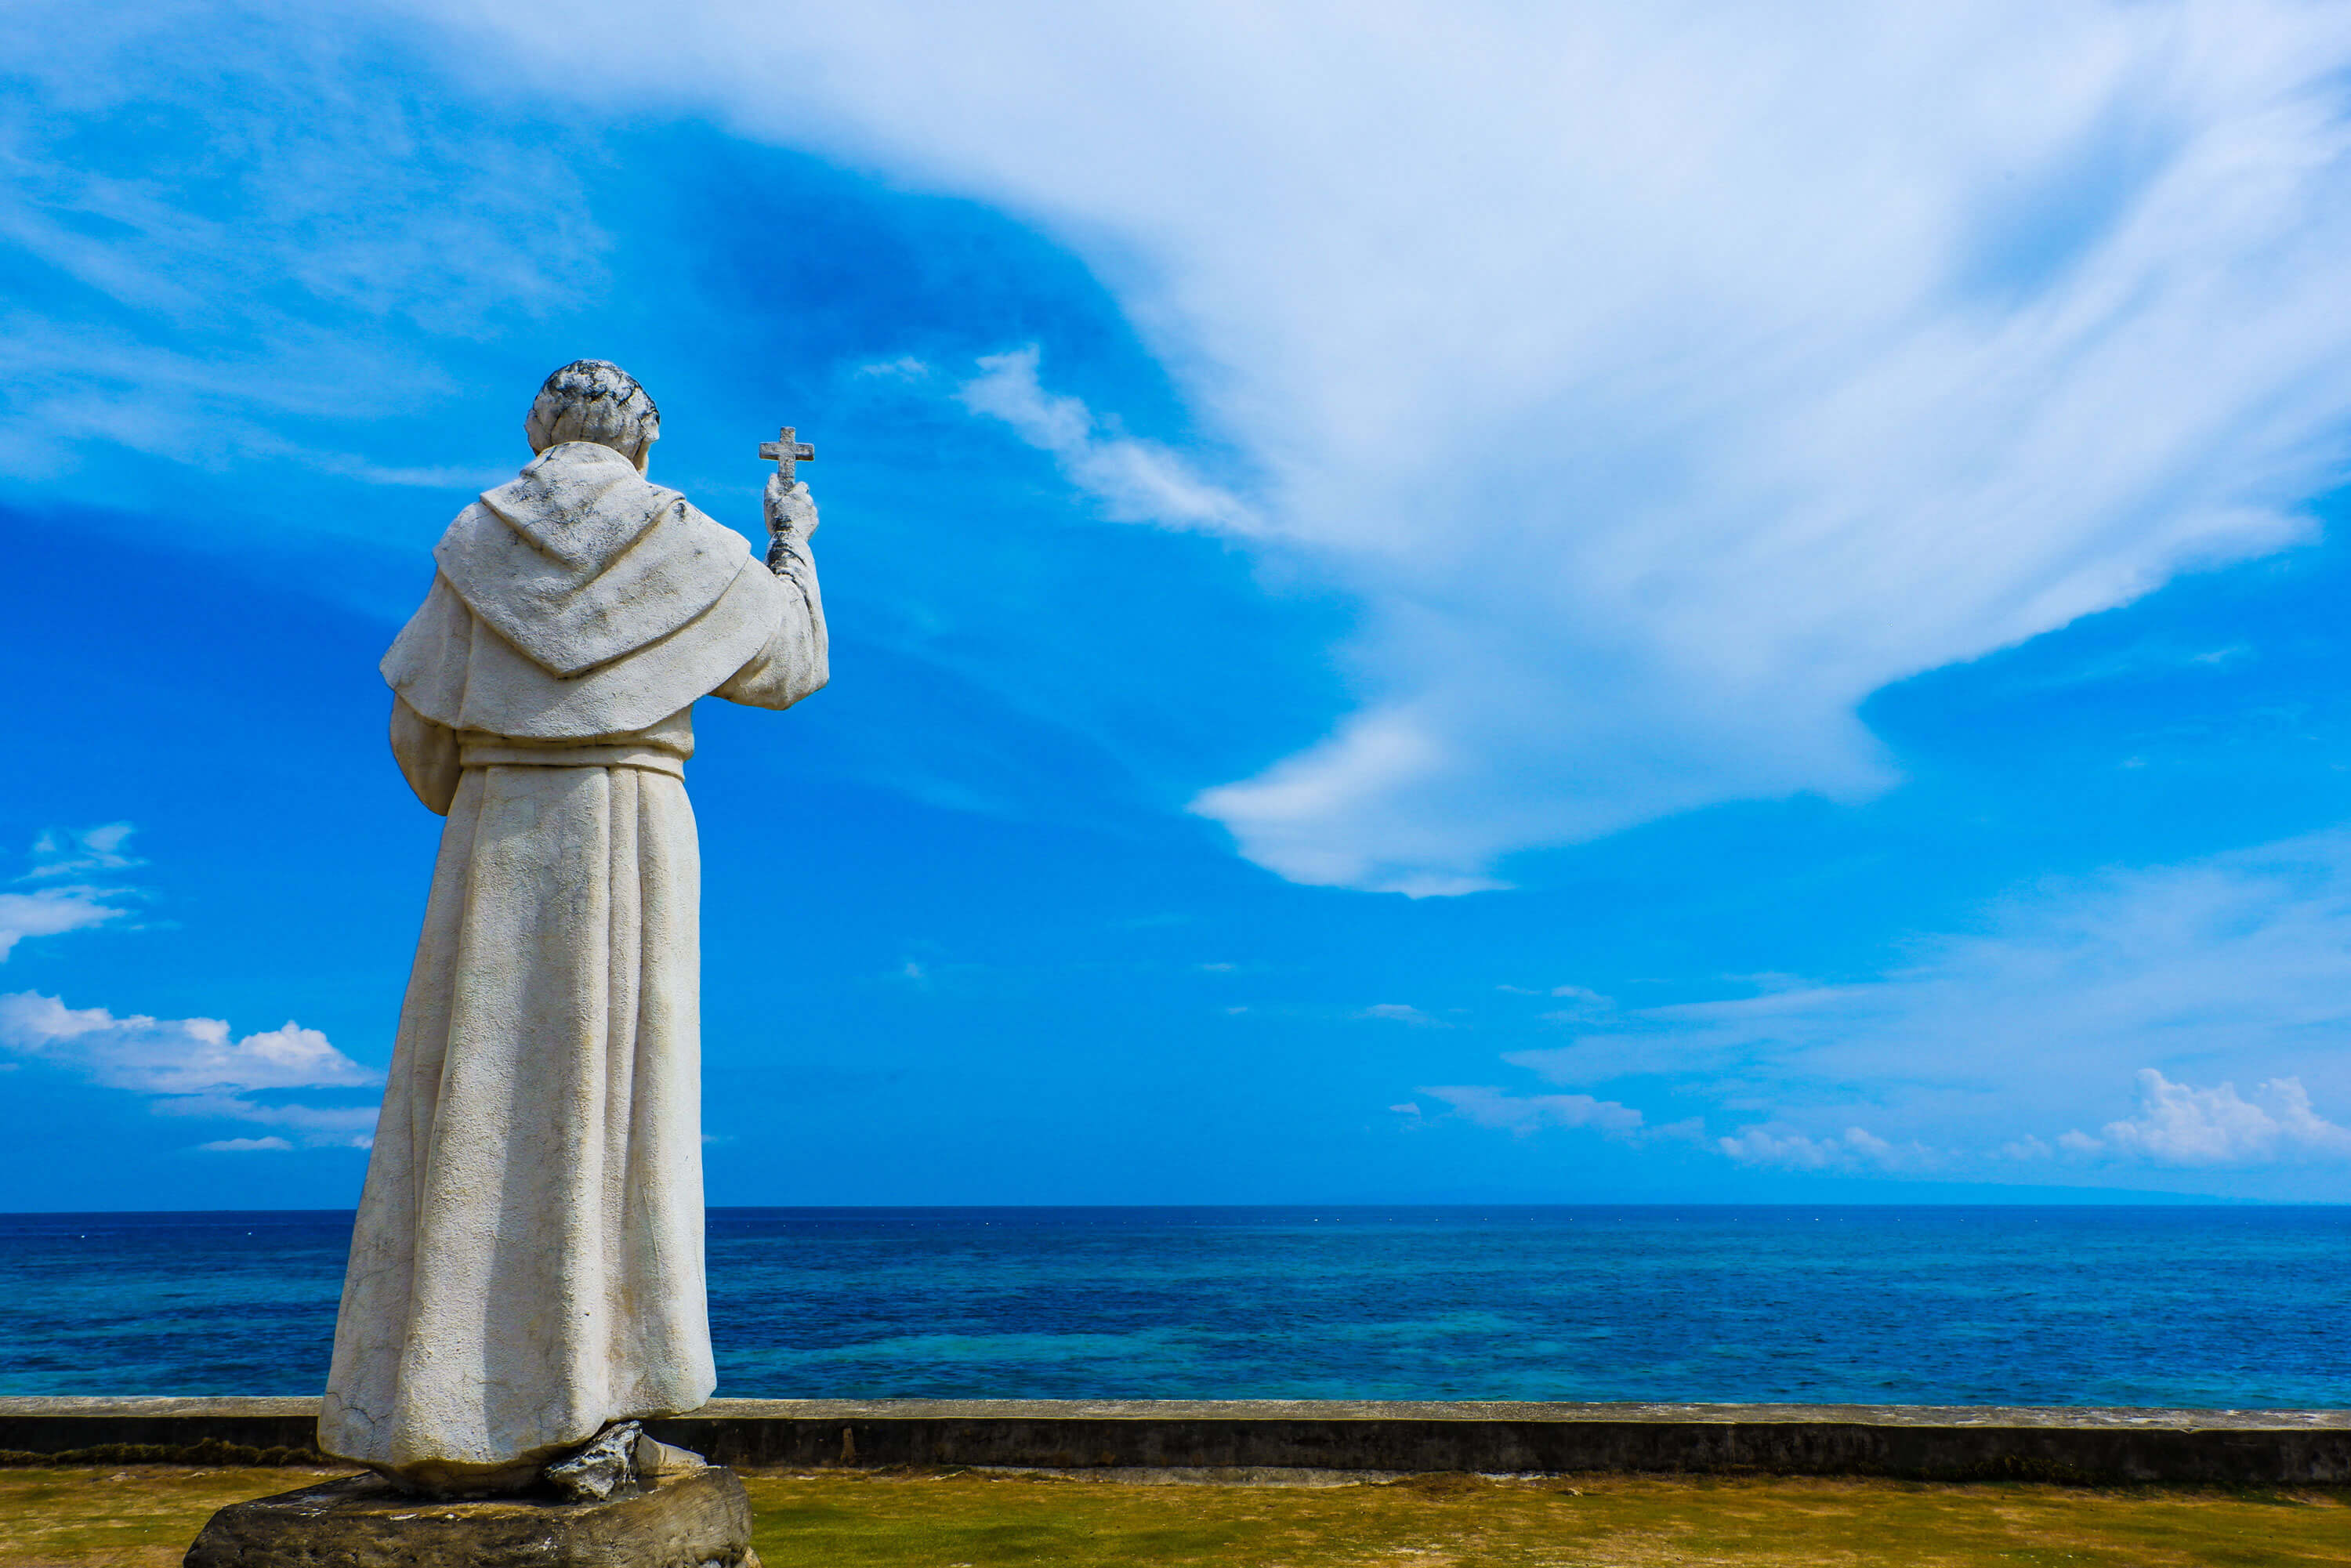 FR. JULIAN BERMEJO looks out to sea. Out there is Sumilon Island where his fleet of Boljoanons defeated Moro raiders led by Gorandeng in 1813. They decapitated the leader and hang his head on the mast. After that decisive victory, raids on Boljoon stopped.